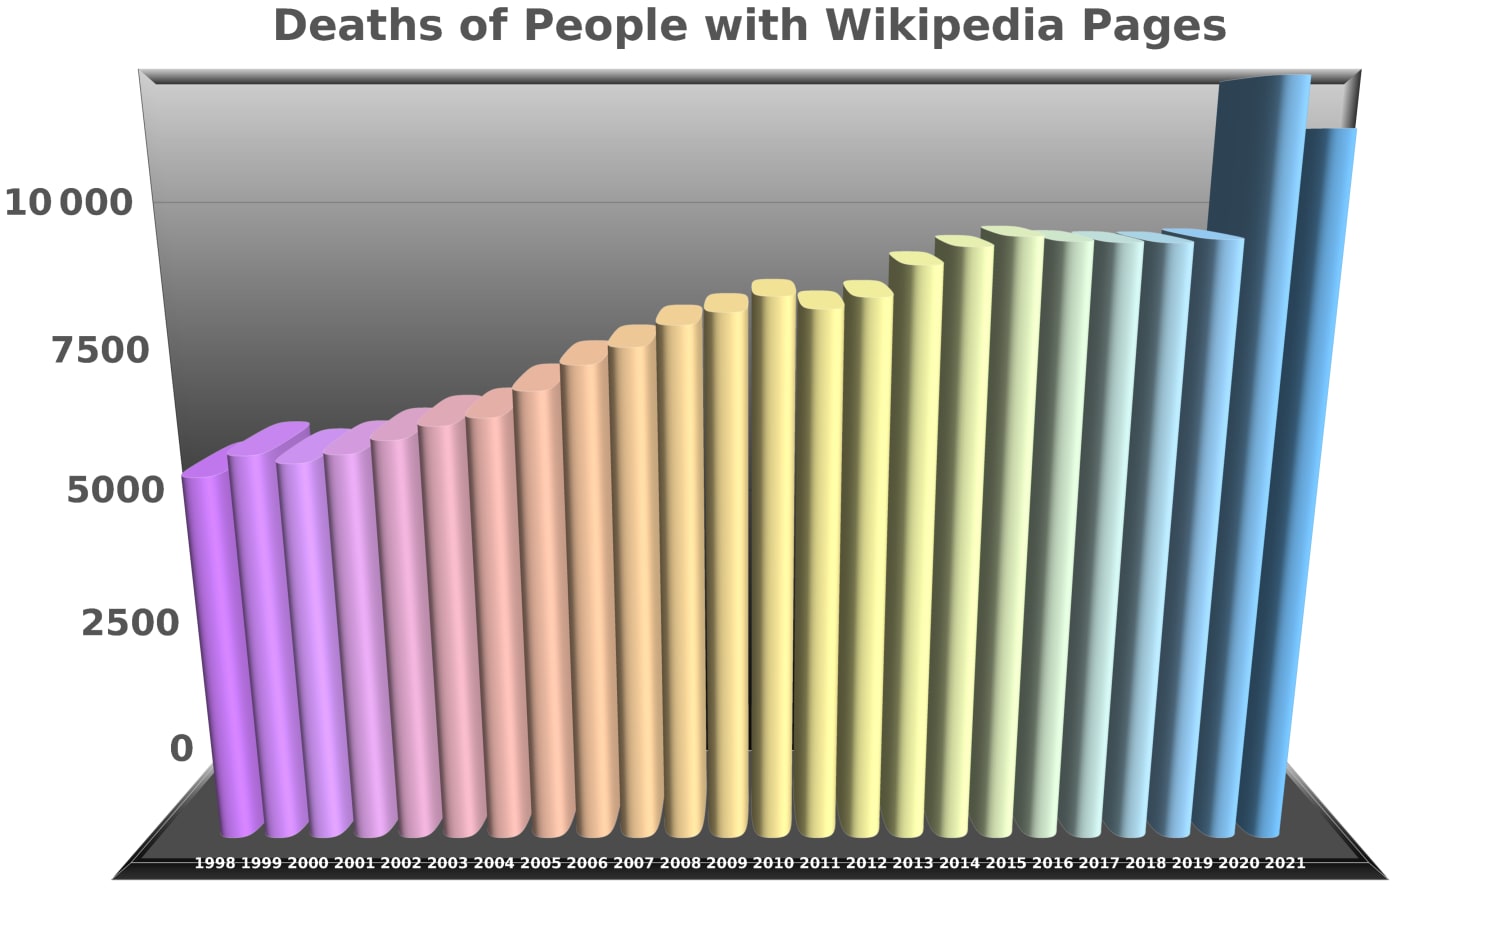 A quickie bar chart of the number of deaths of people with Wikipedia pages from 1998 - 2021. Interpret as you see fit.